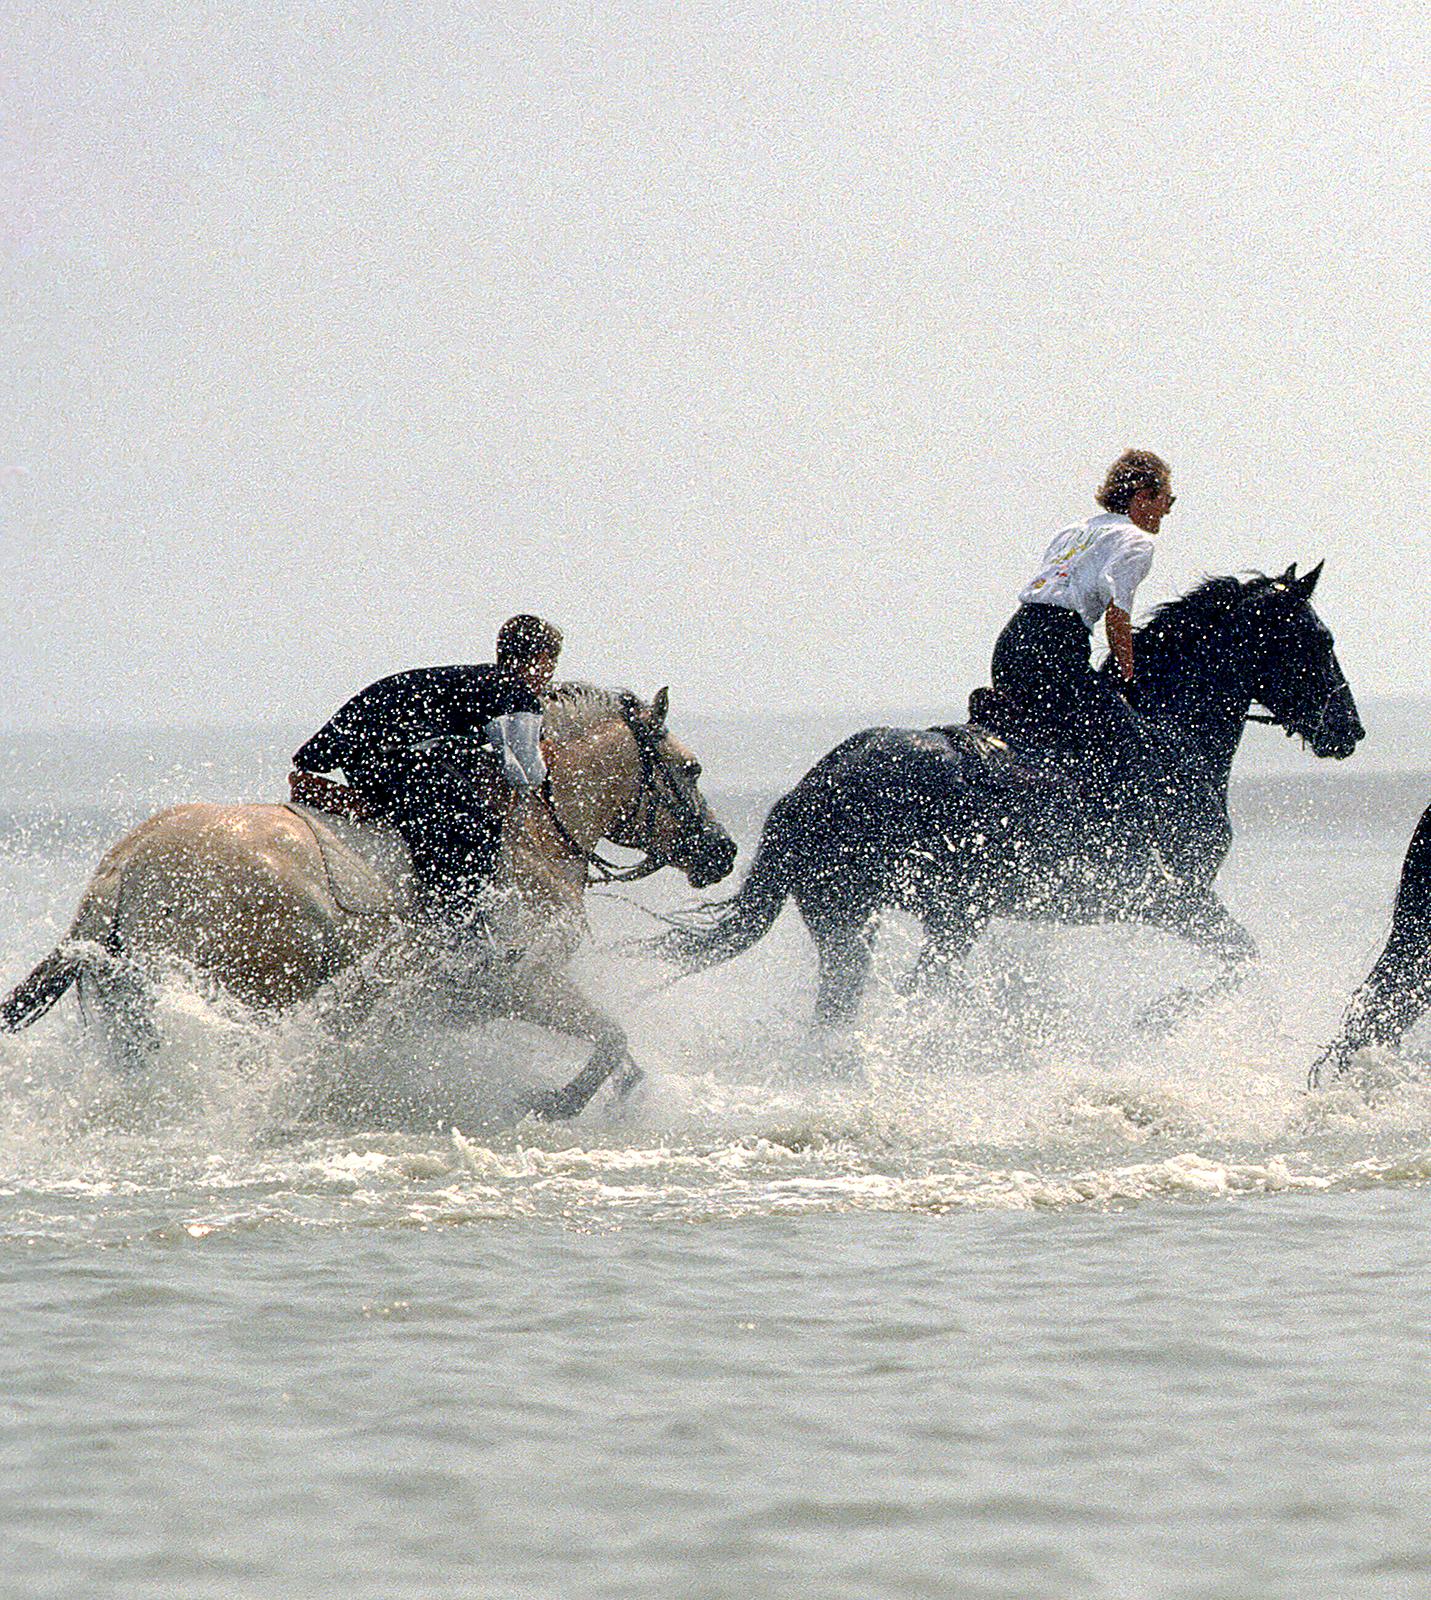 Horse riding - Color photography, Limited edition print, Race at rising tide - Photograph by Sam Thomas